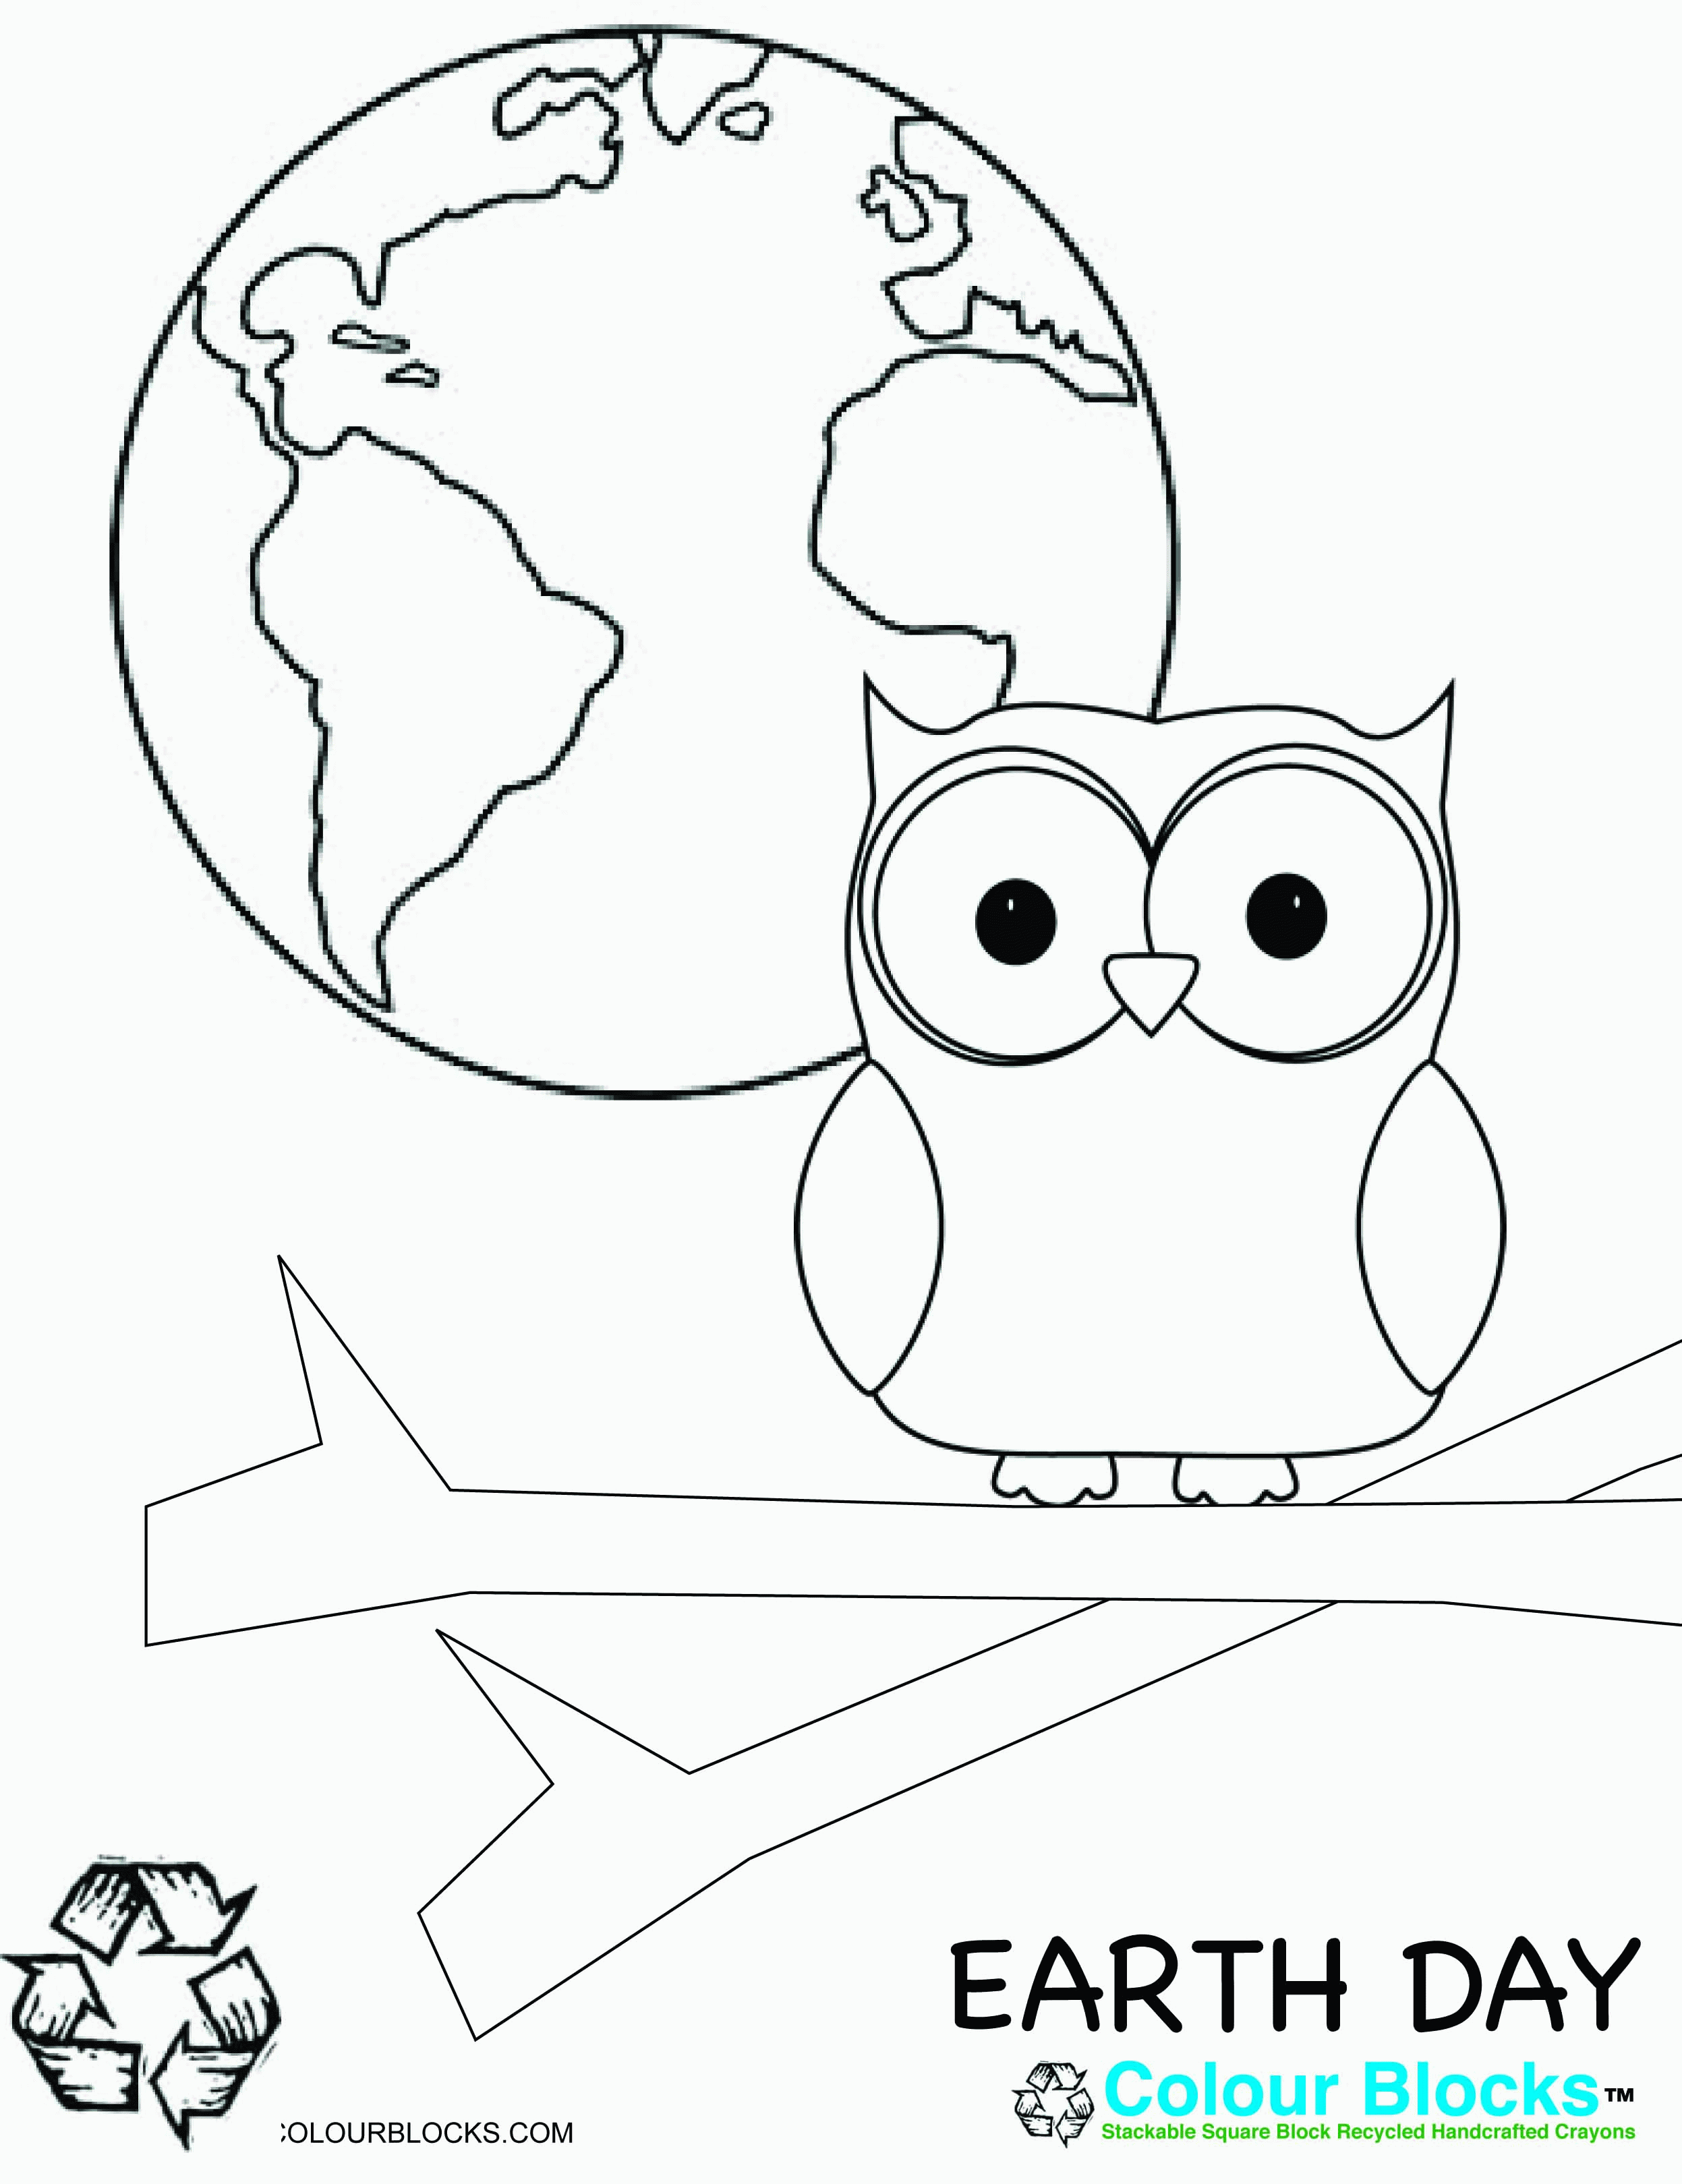 Great journey ahead 13 Columbus day coloring pages | Print Color Craft